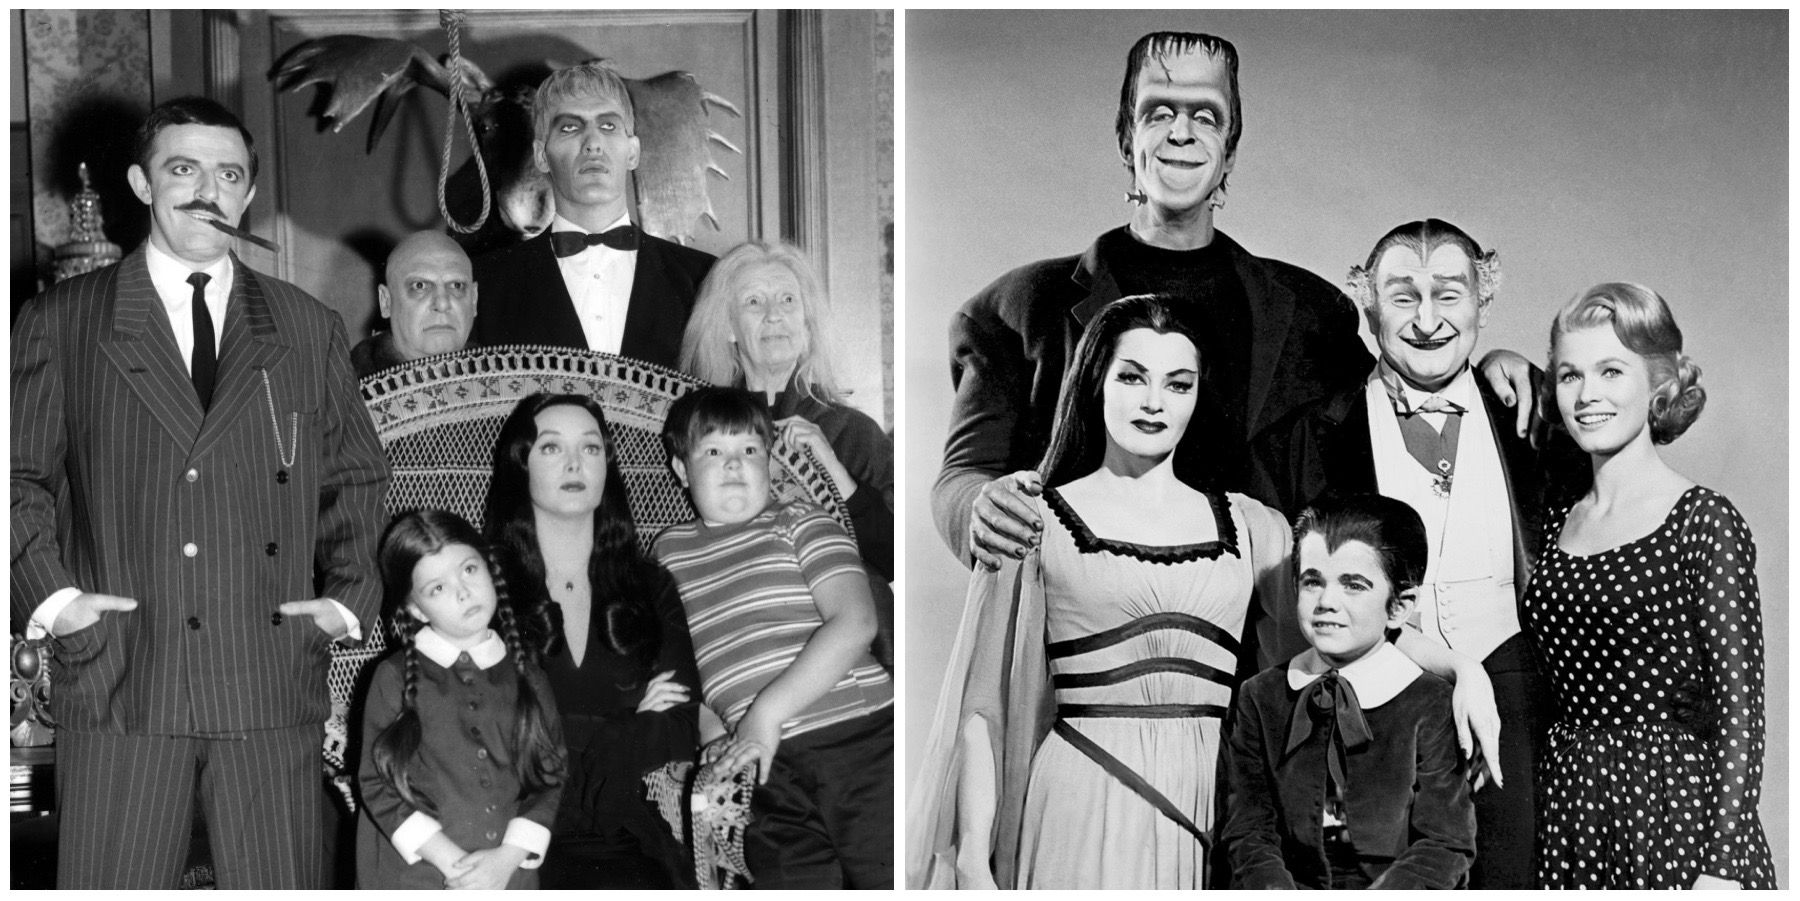 The Munsters and The Addams Family